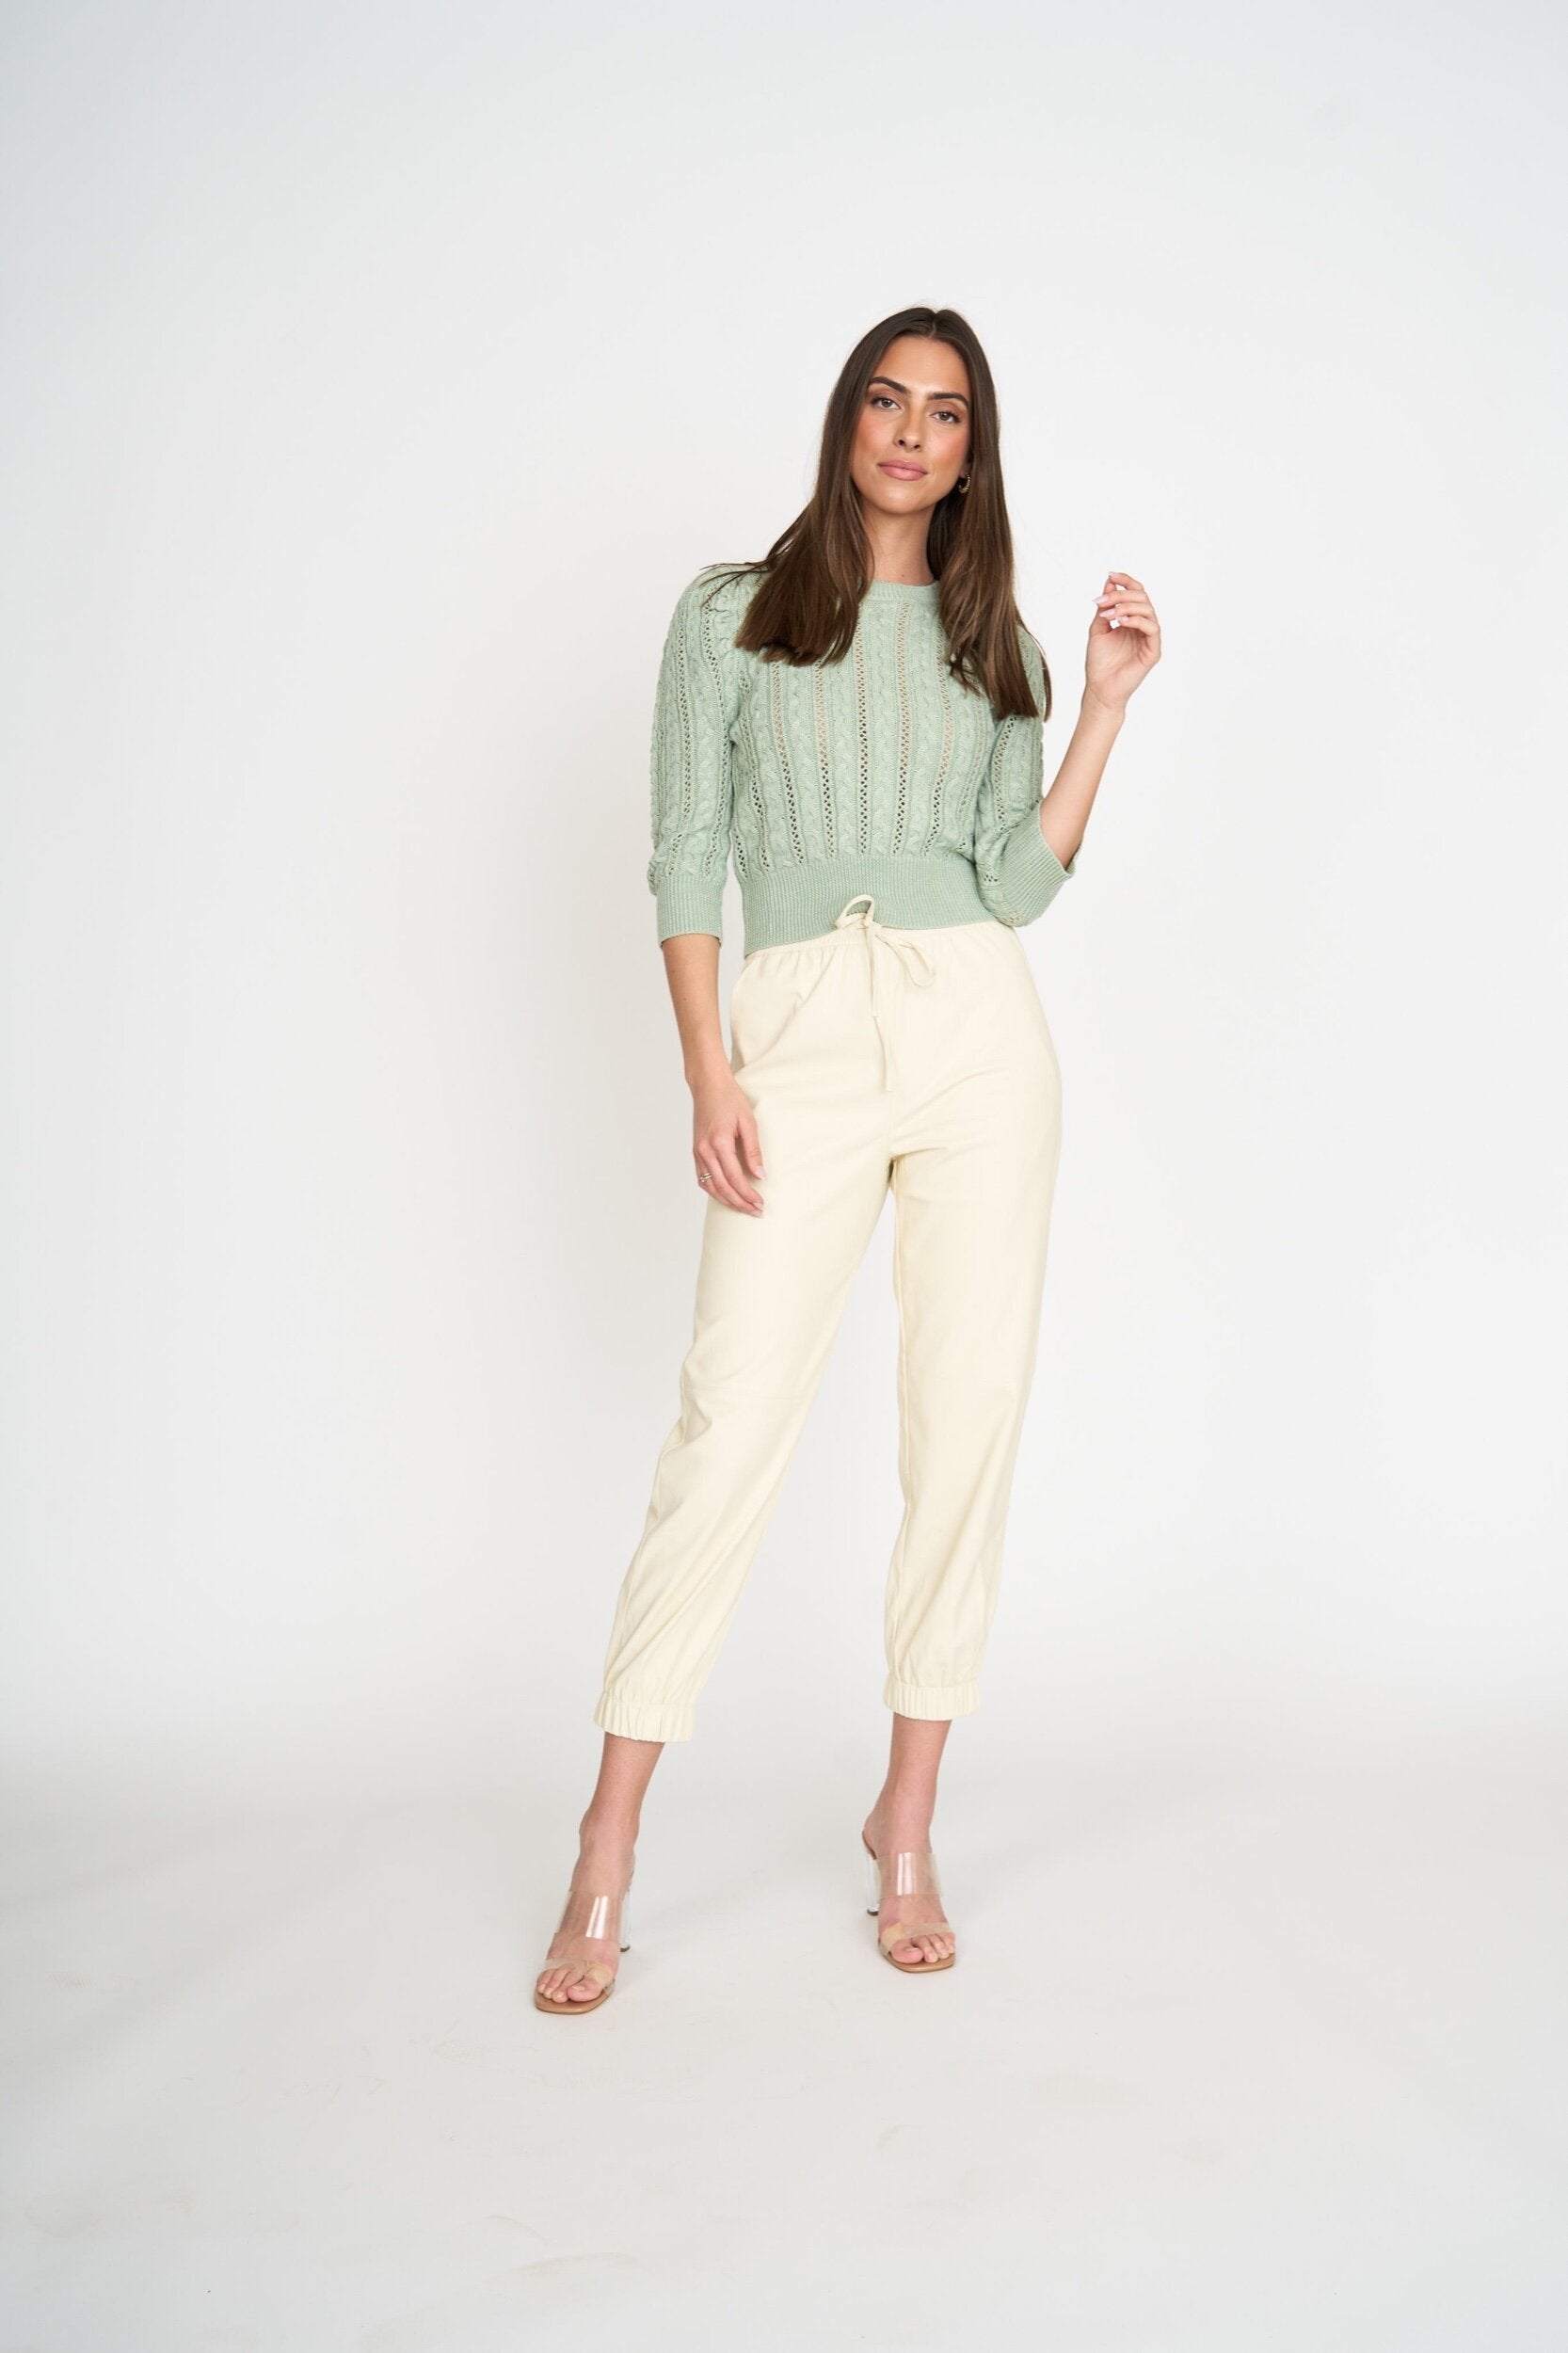 August Leather Pants - Cream